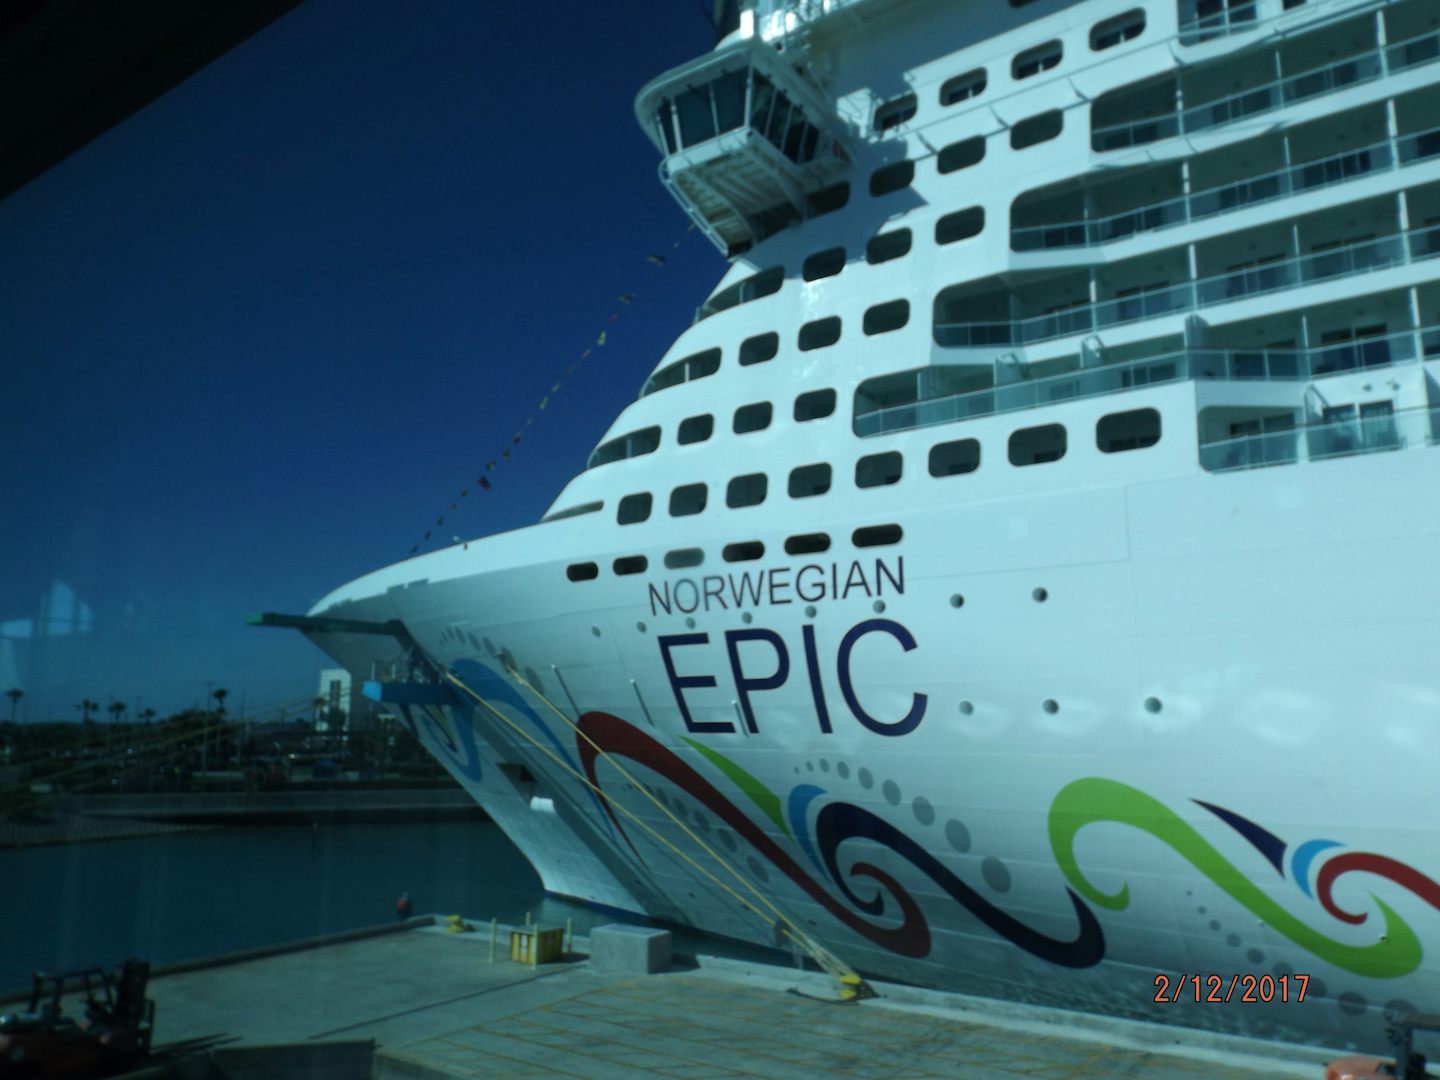 Our Ship - Epic